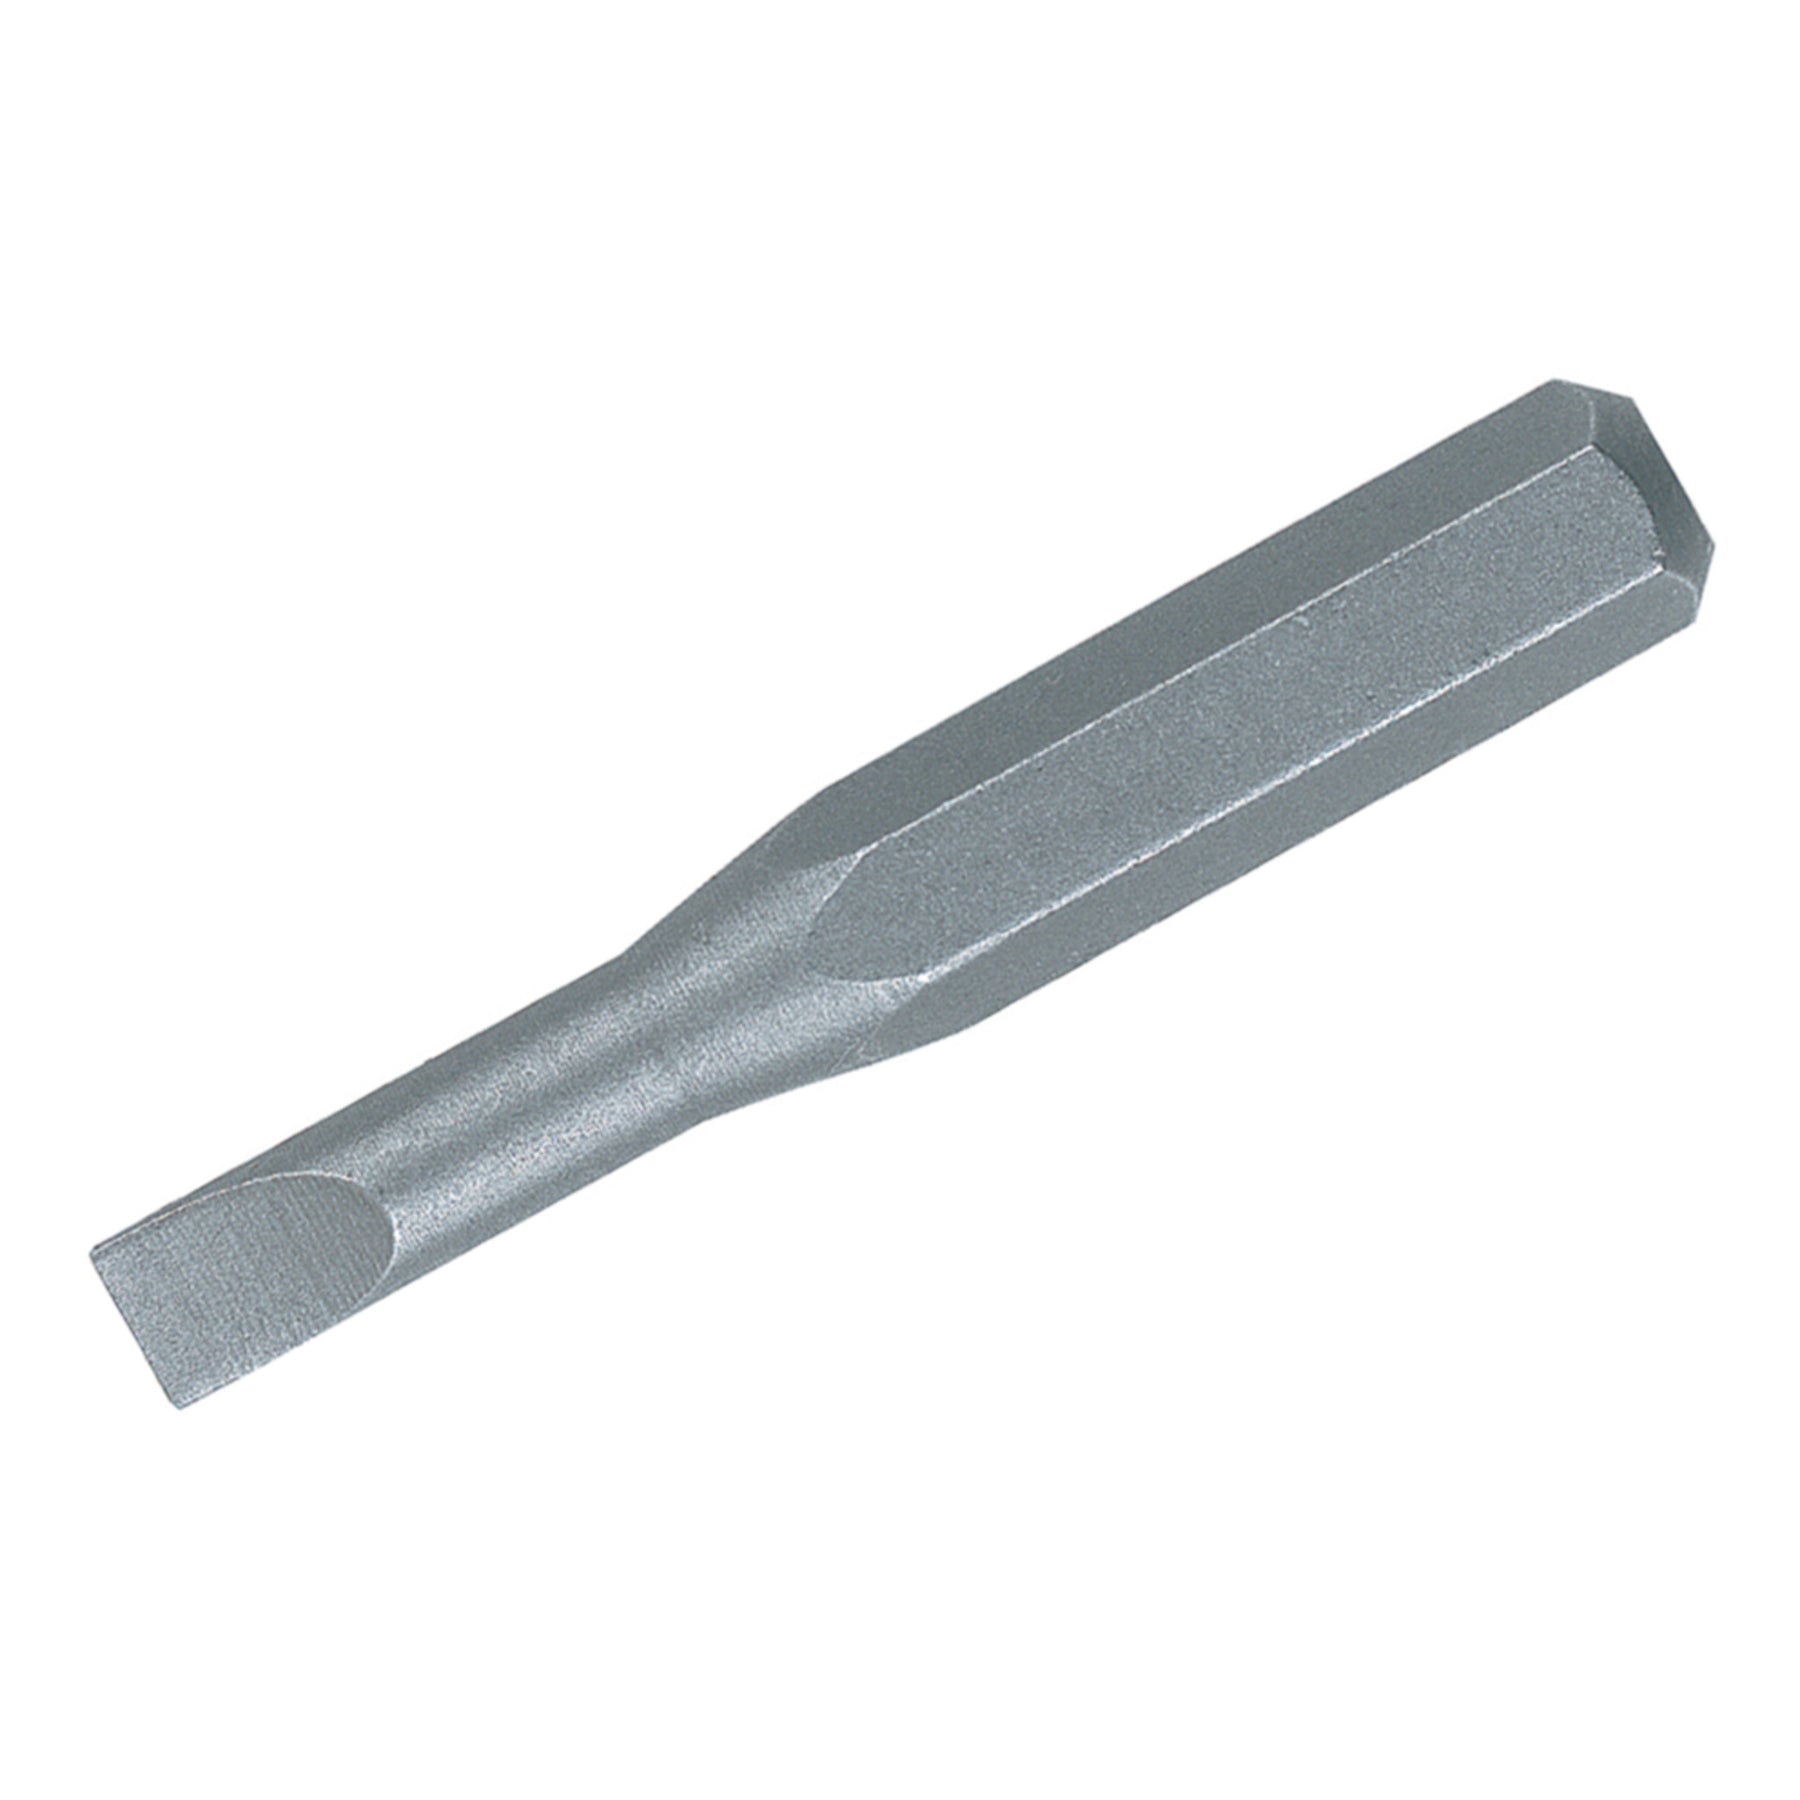 Wiha 75018 System 4 Slotted MicroBits 1.8 x 28mm